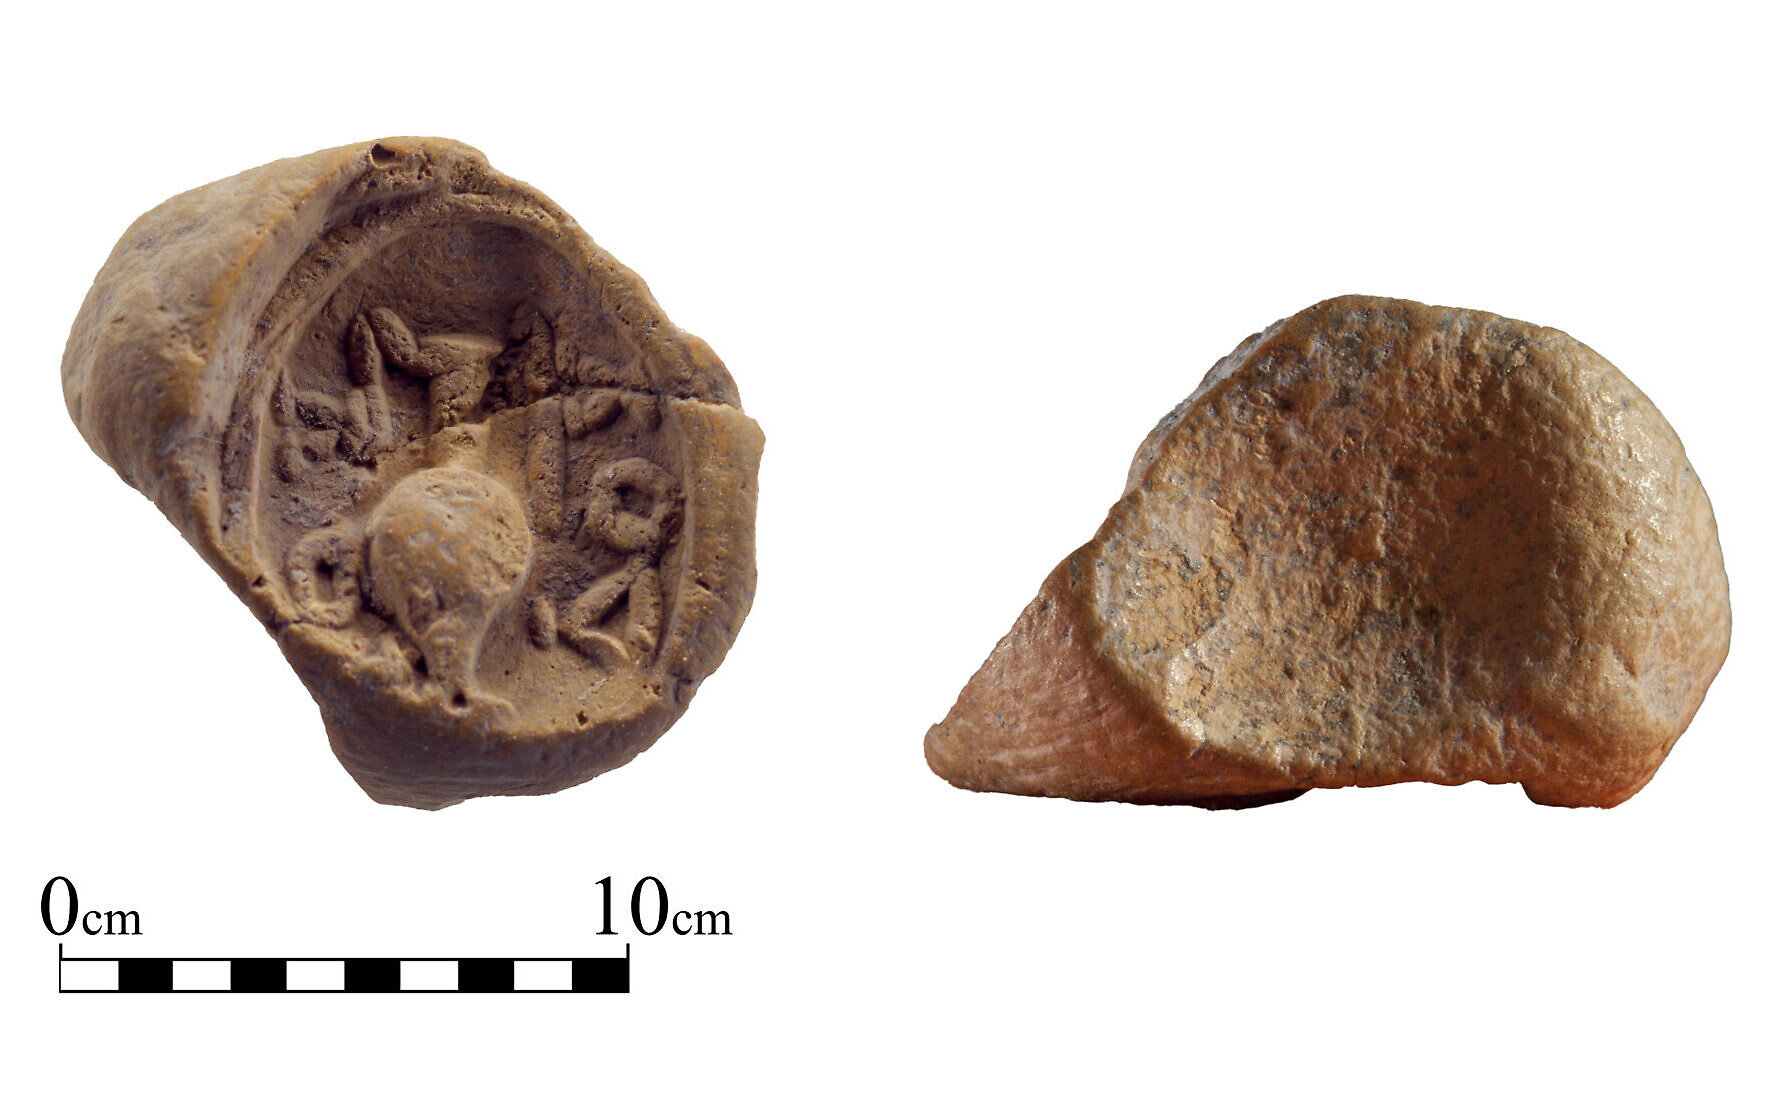 Intriguing Greek-inscribed token was likely traded for feast offerings at Second Temple